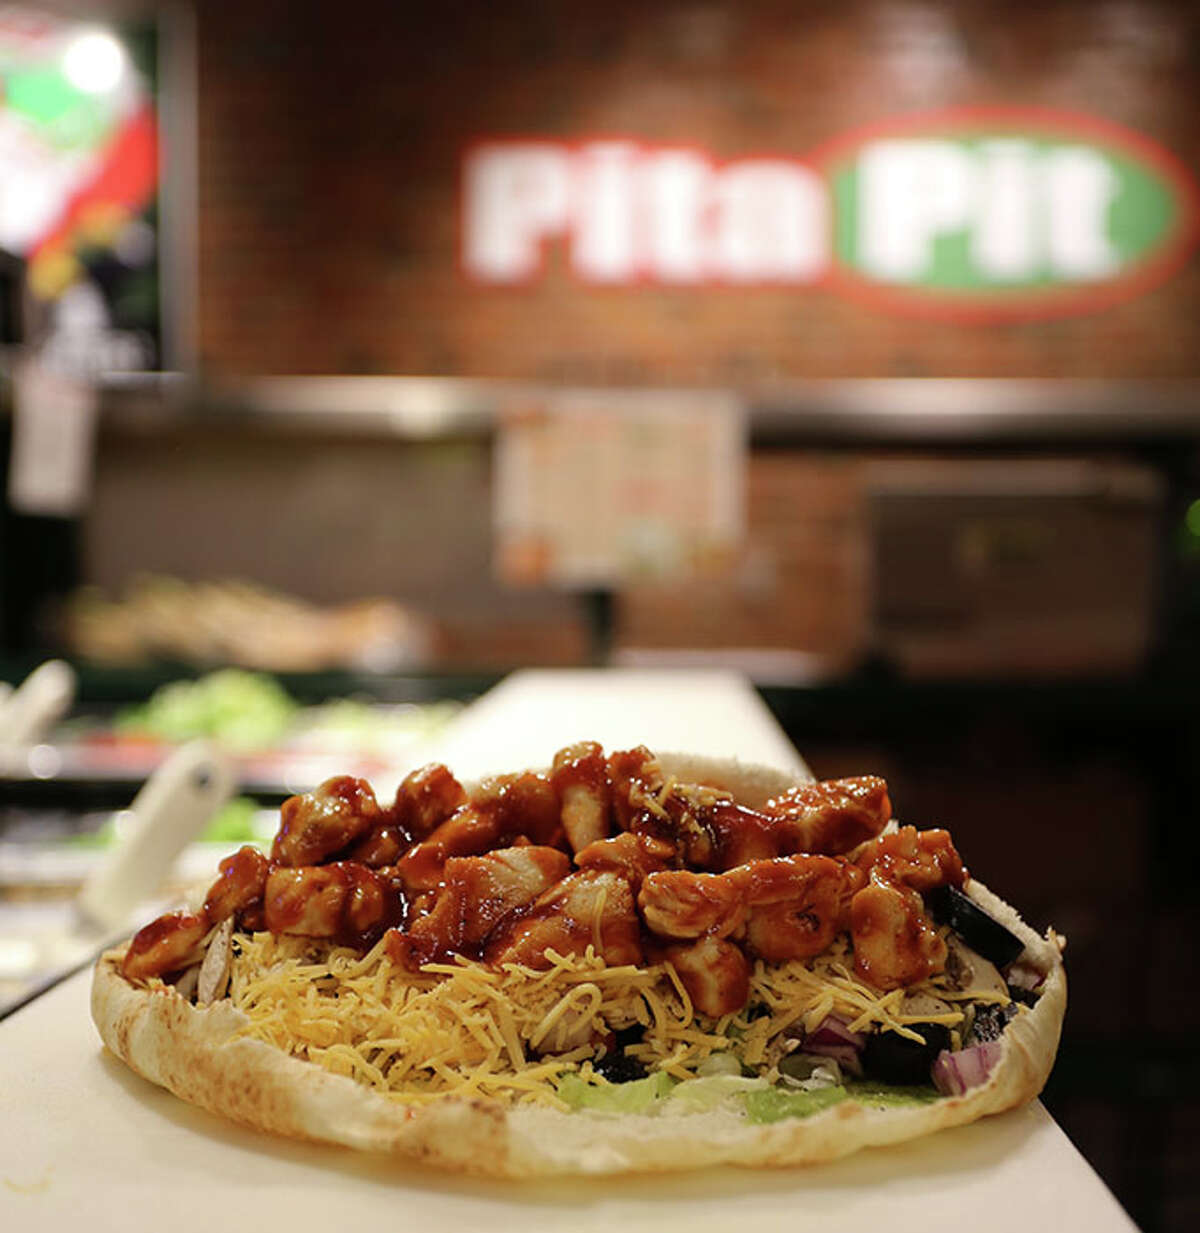 Buffalo chicken is on the menu at Pita Pit. Patrons can customize their pitas by selecting a variety of ingredients as they go through the line.